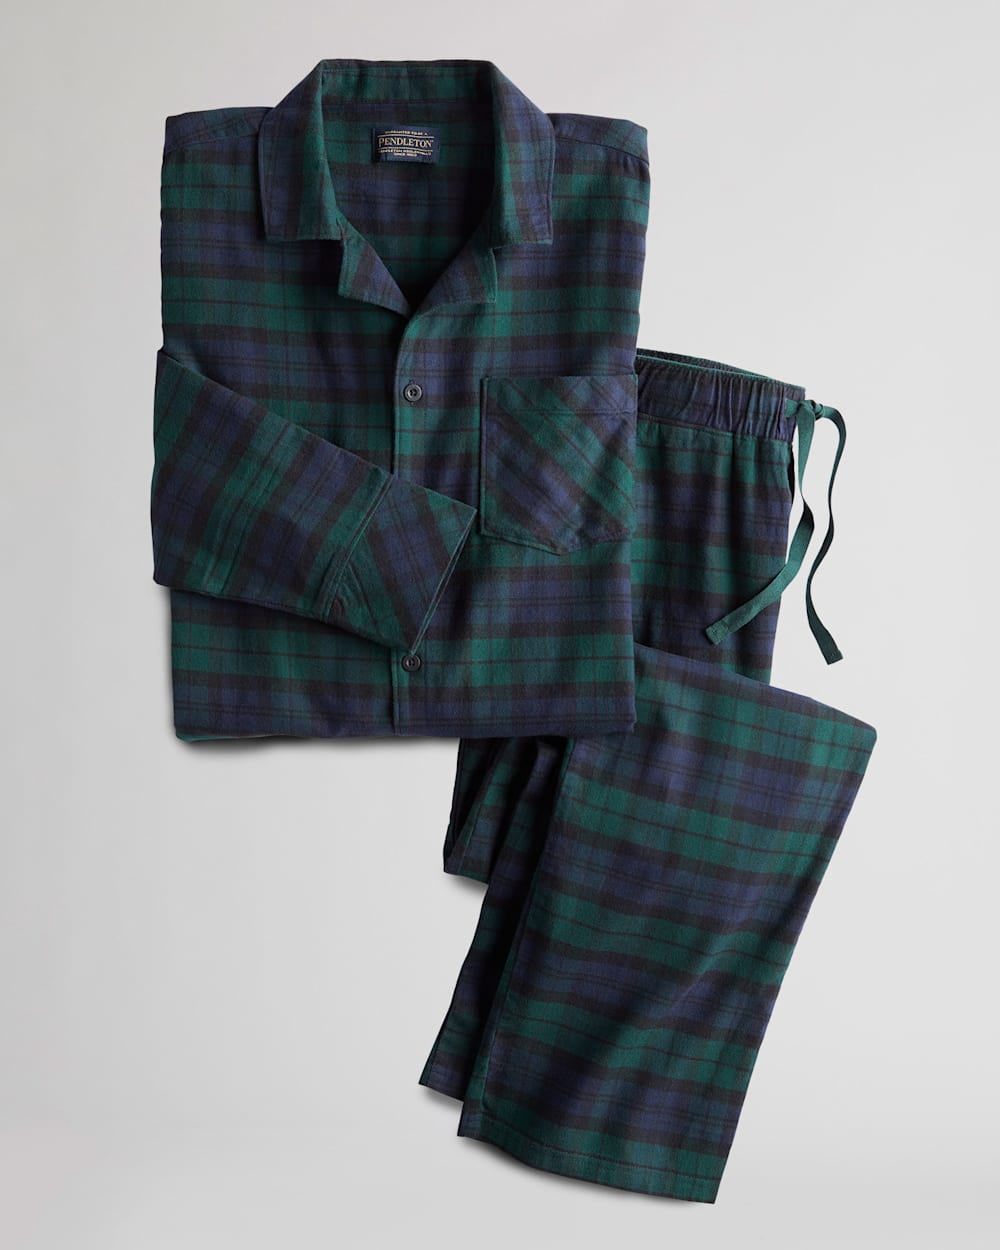 ALTERNATE VIEW OF MEN'S FLANNEL PAJAMA SET IN GREEN/BLUE PLAID image number 2